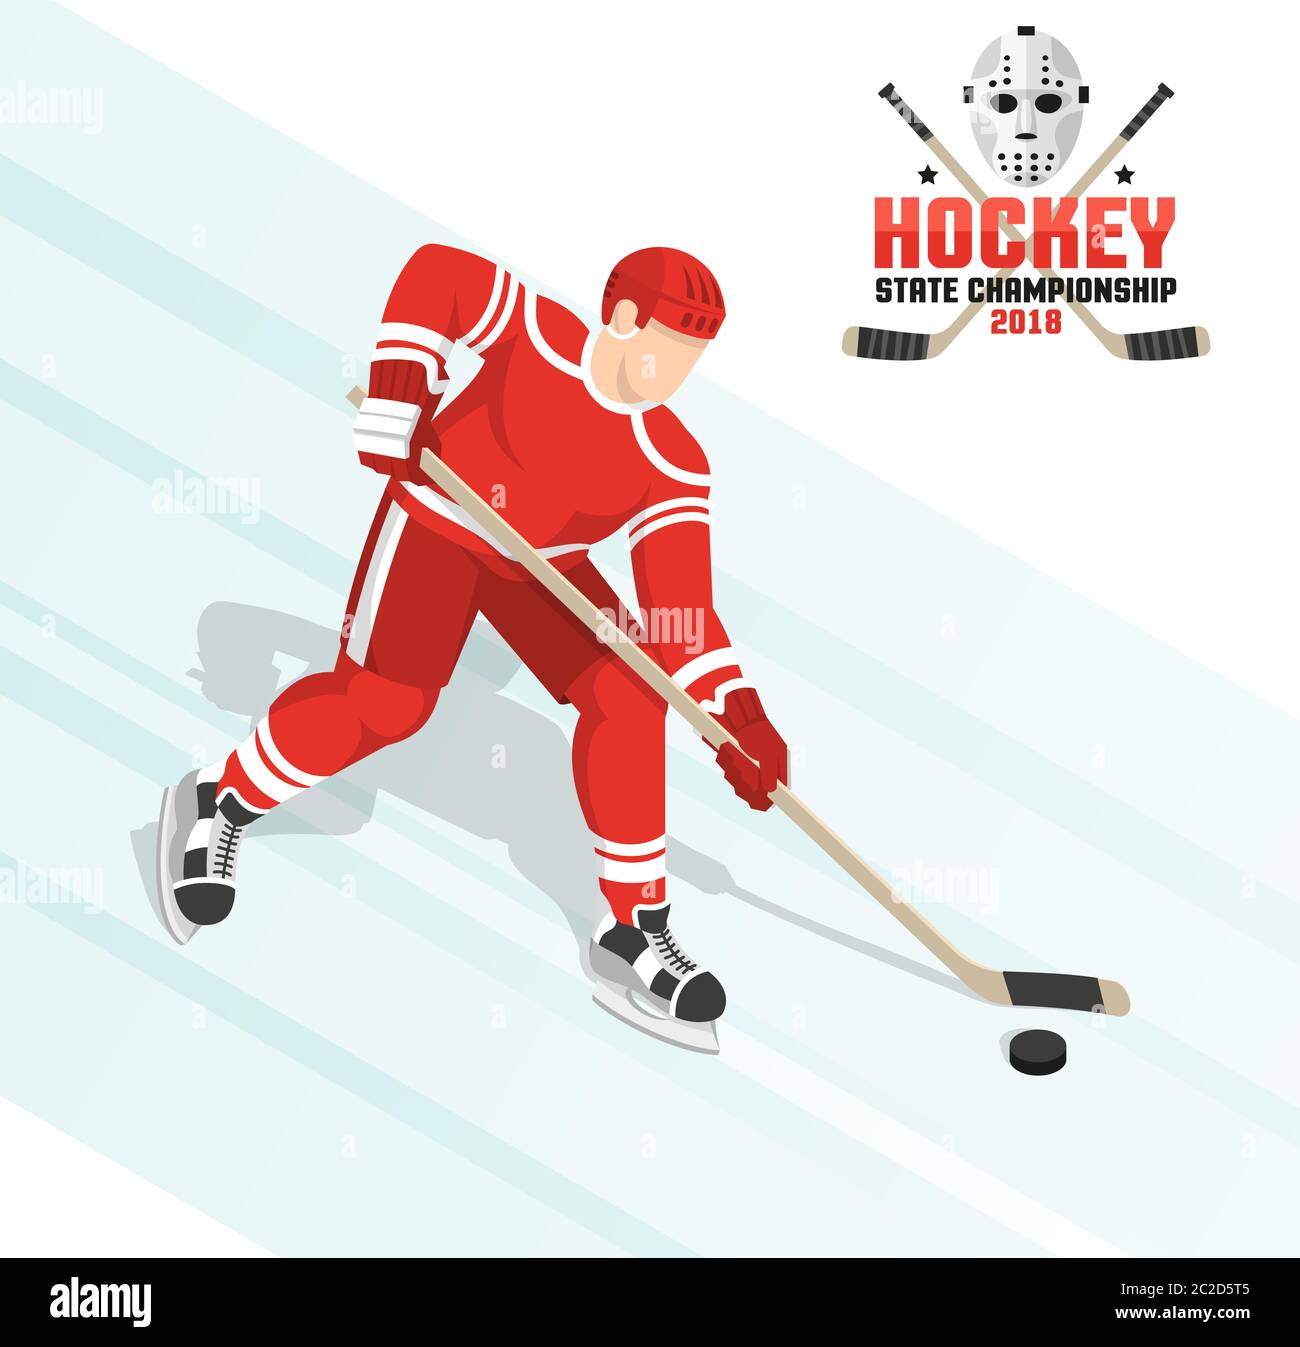 A hockey player leads the puck on ice in a red uniform Stock Vector